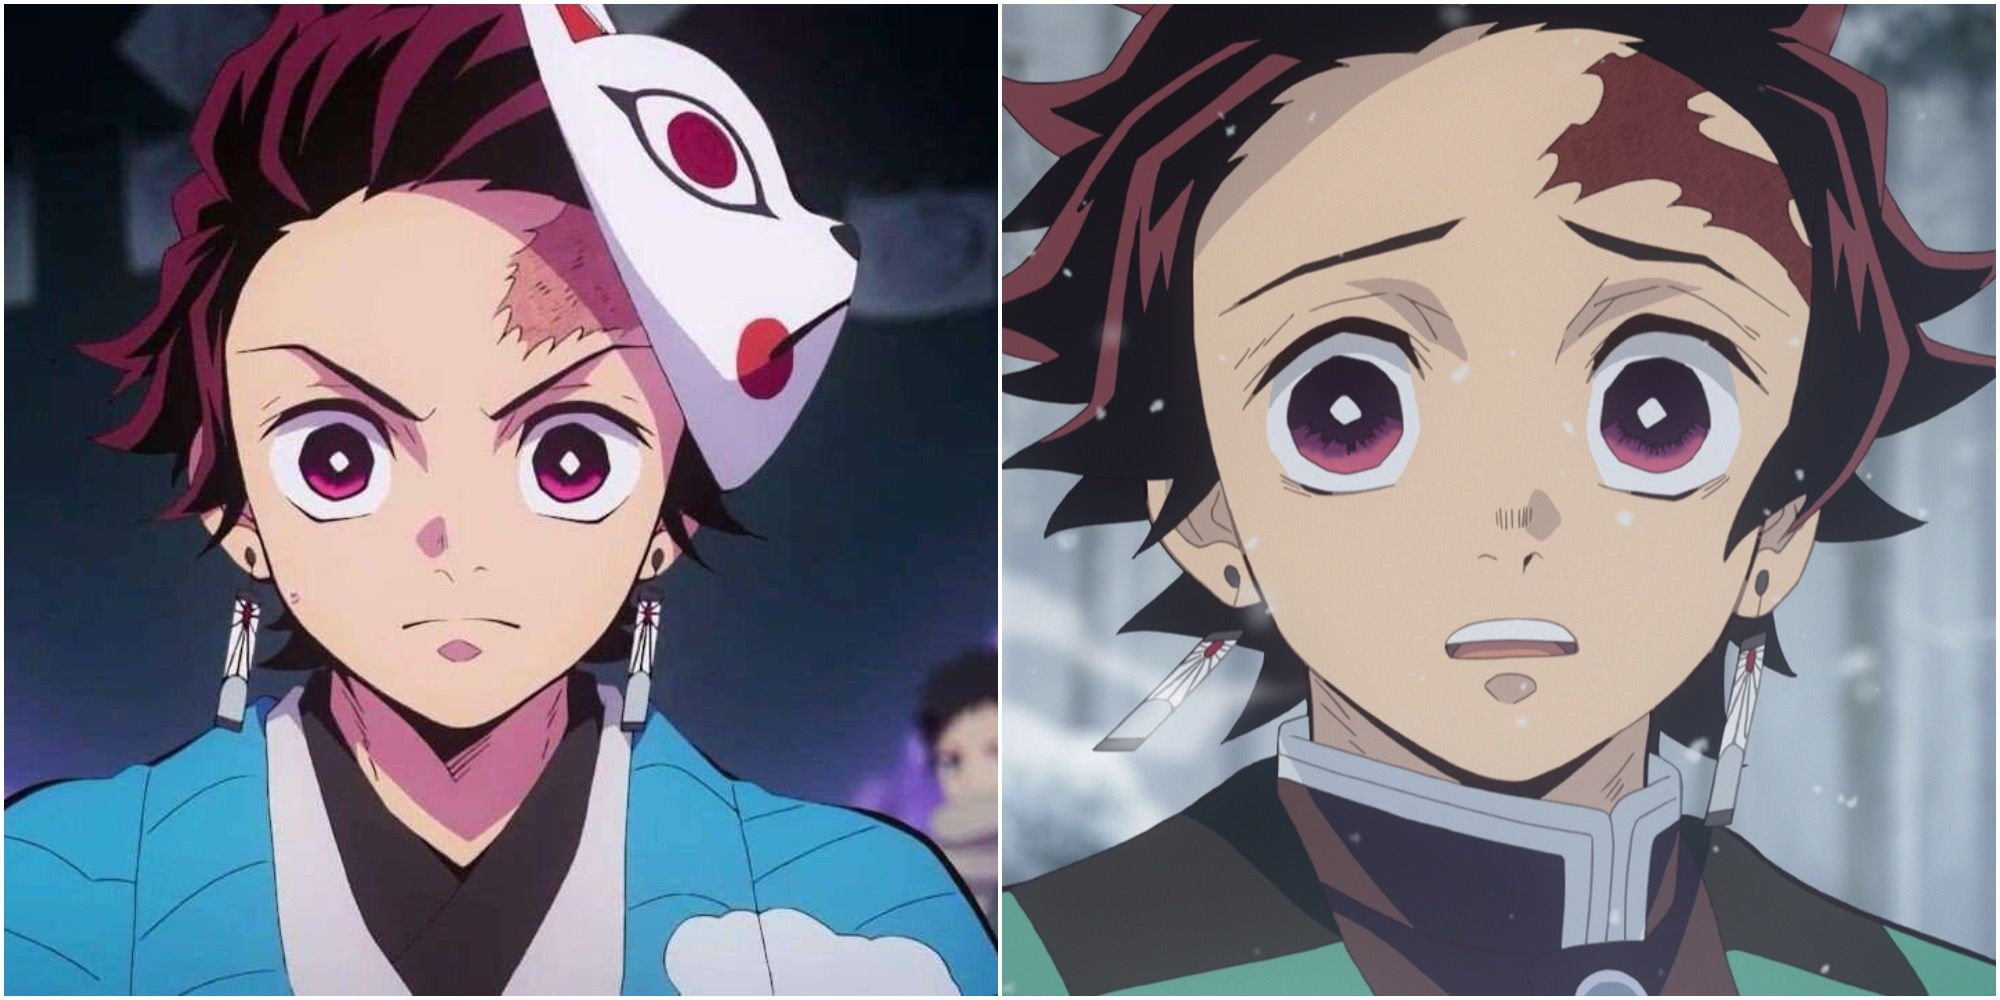 Demon Slayer: Collage Of Tanjiro Kamado With Fox Mask And Close Up